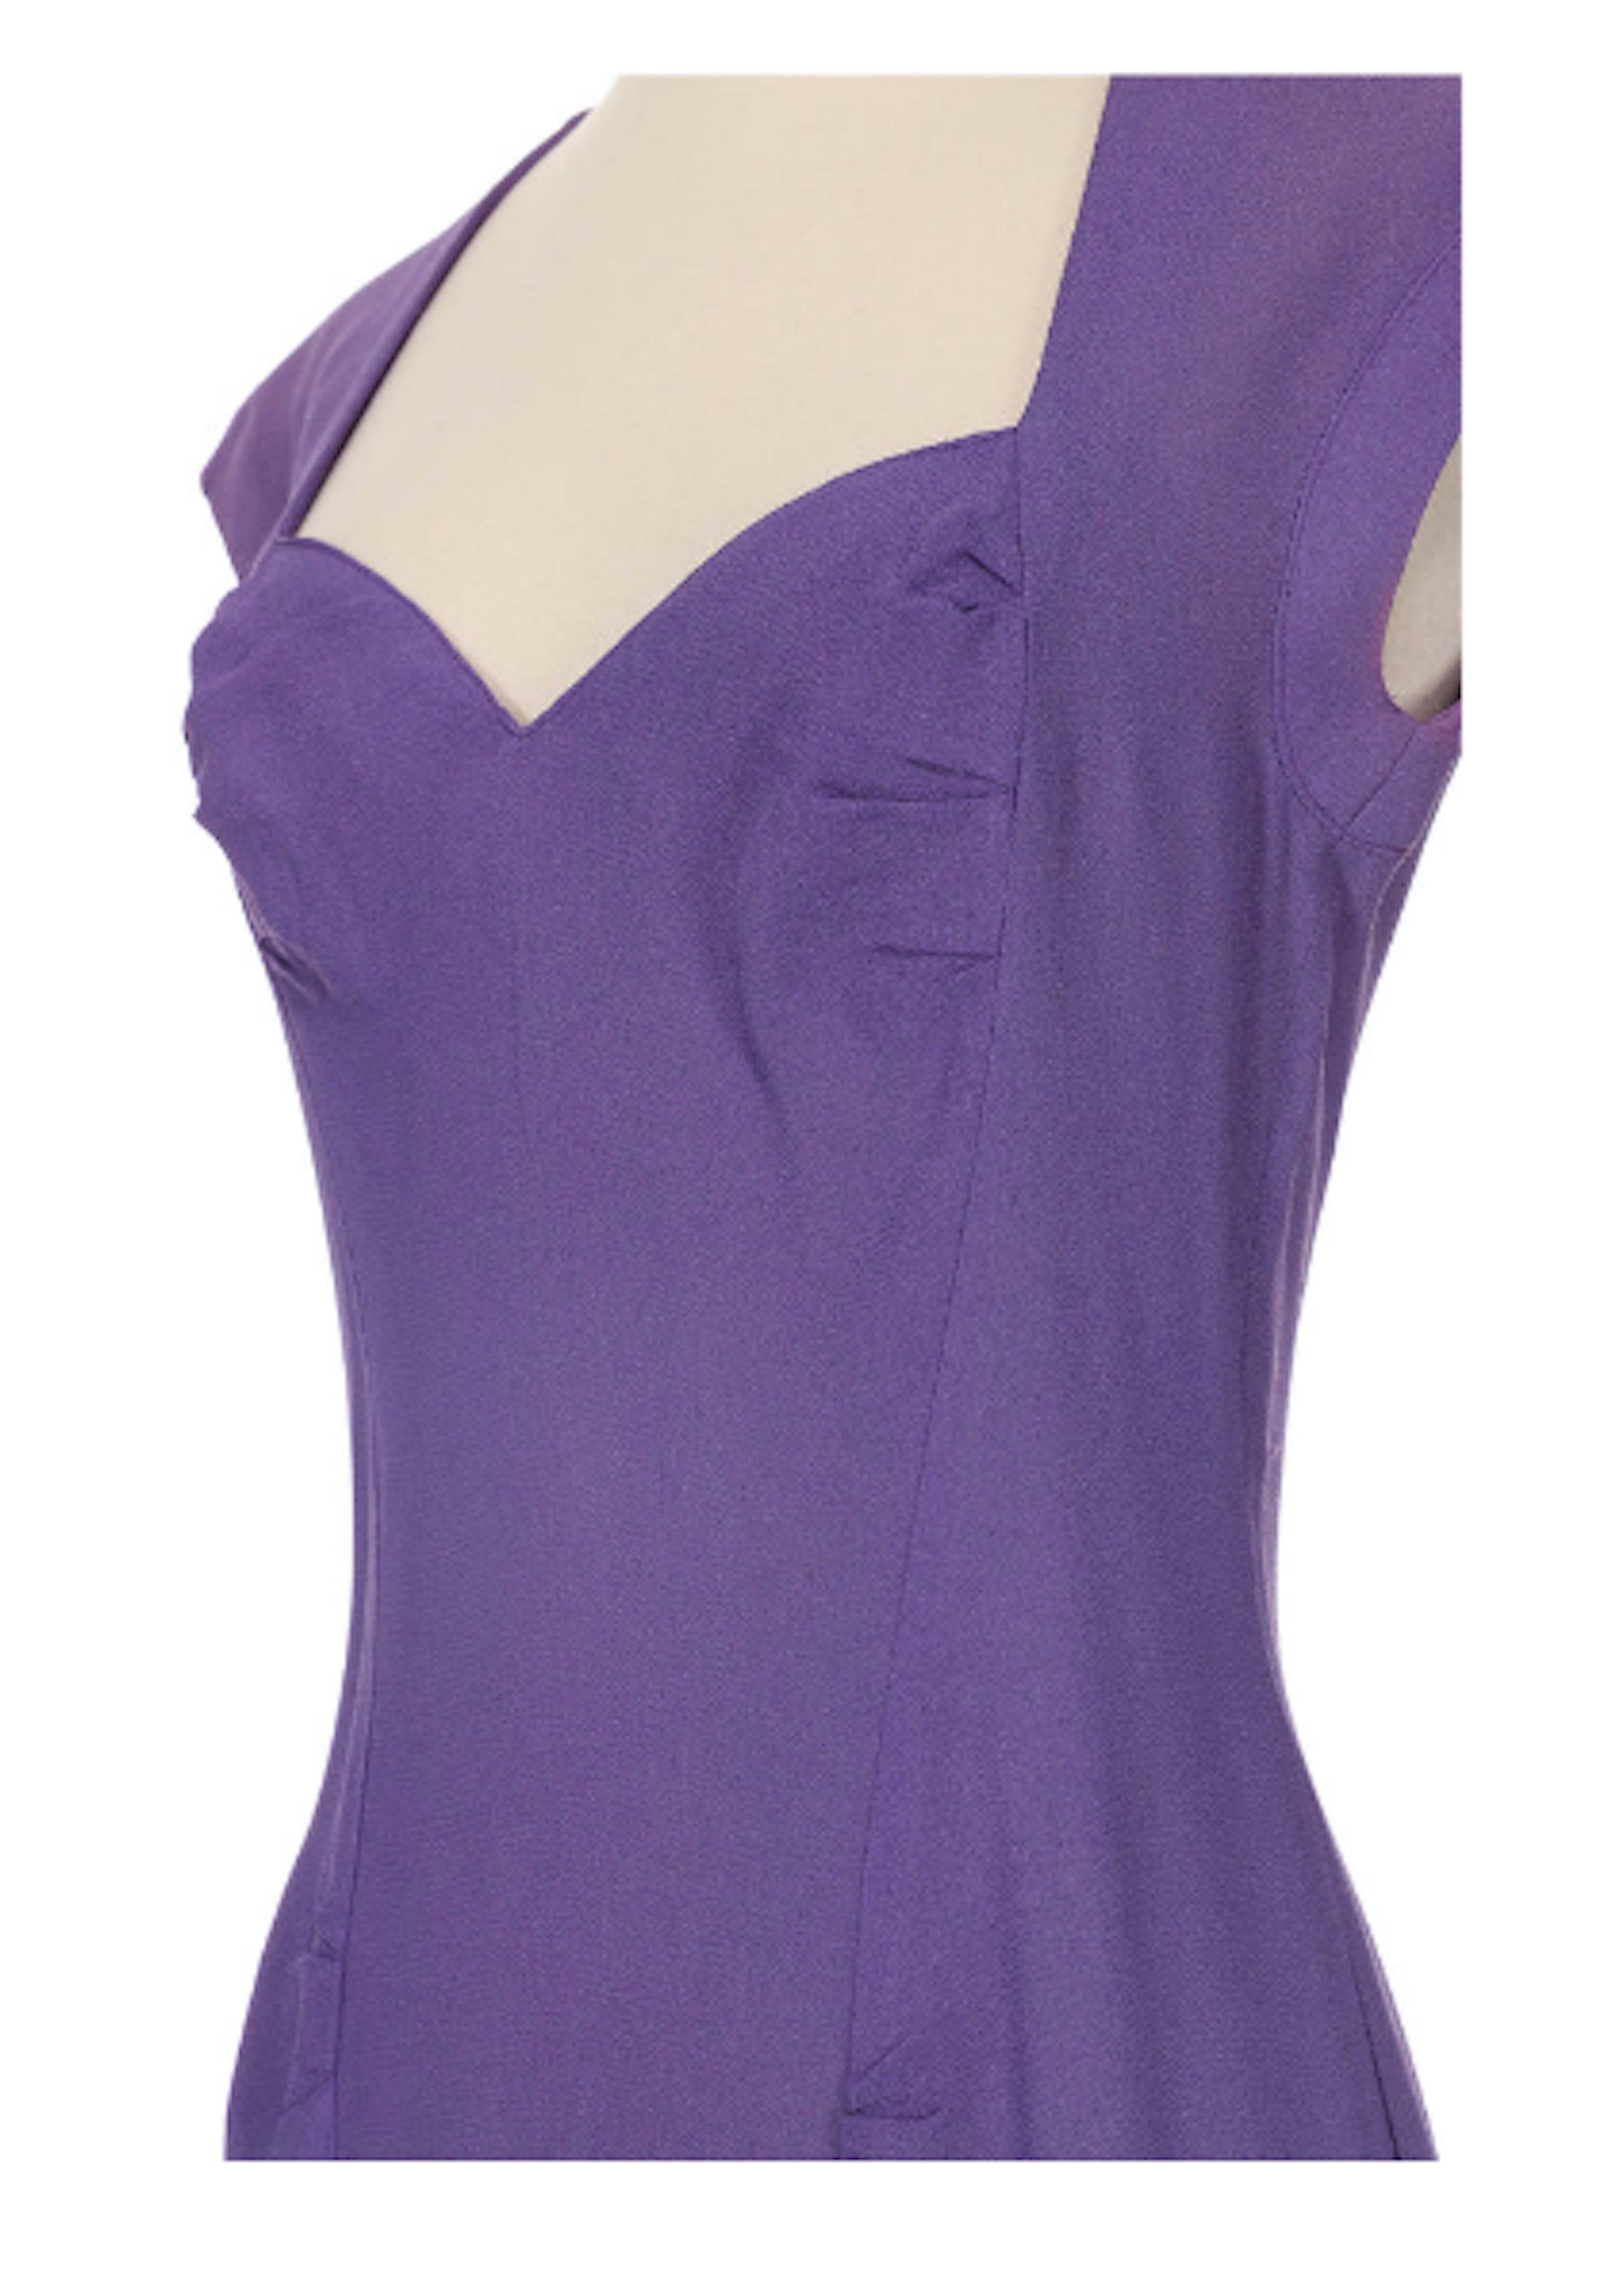 Ossie Clark For Radley 1970's Purple Dress In Excellent Condition For Sale In New York, NY